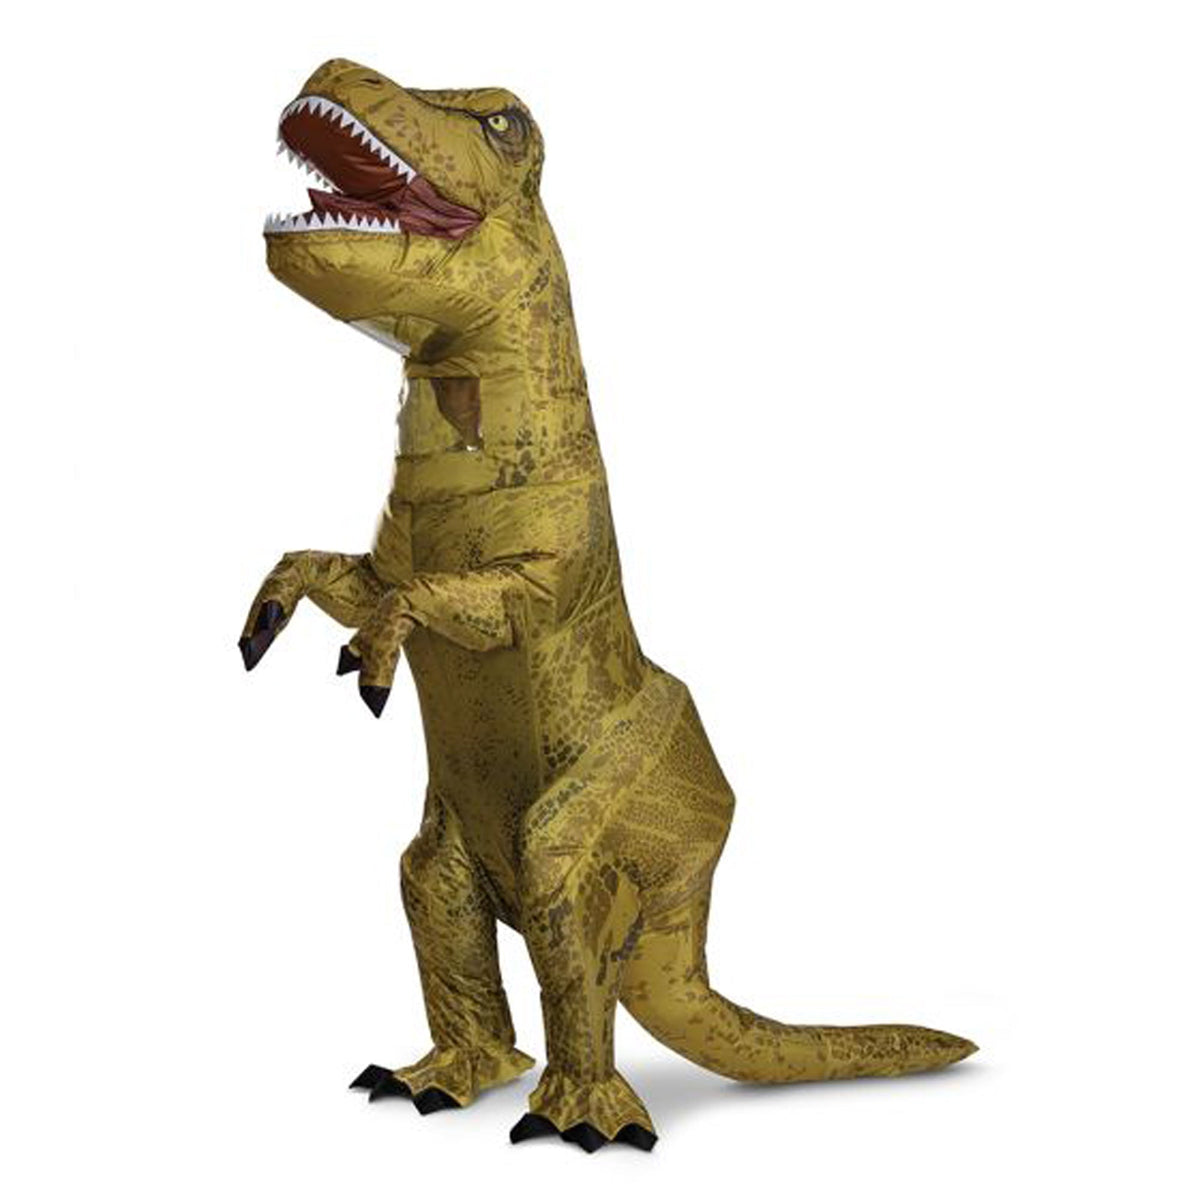 DISGUISE (TOY-SPORT) Costumes Jurassic World T-Rex Inflatable Costume for Adults, Green Jumpsuit 192995053229